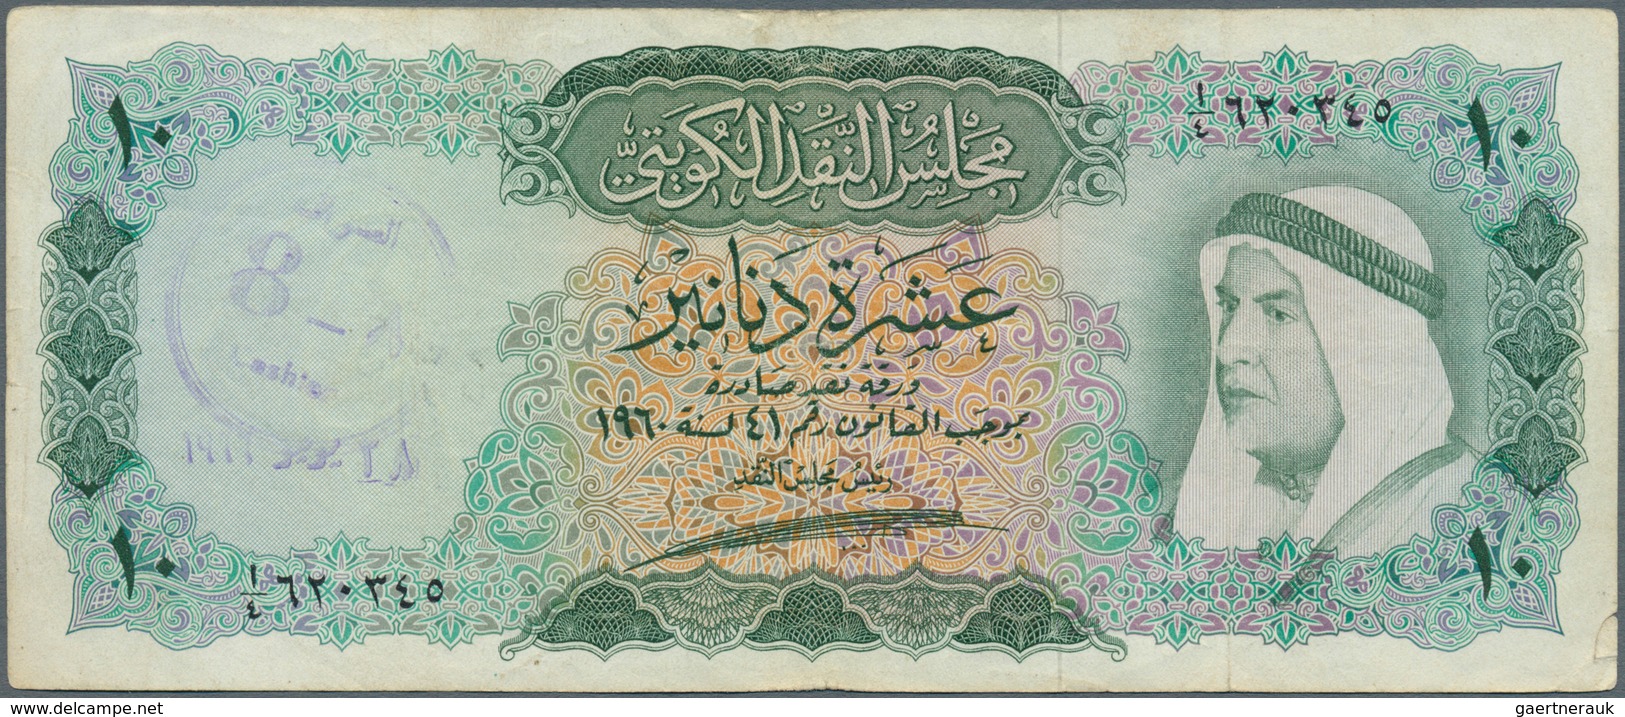 01918 Kuwait: 10 Dinard ND P. 5, Used With Vertical Folds And Bank Stamp In Watermark Area, No Holes, One - Koeweit